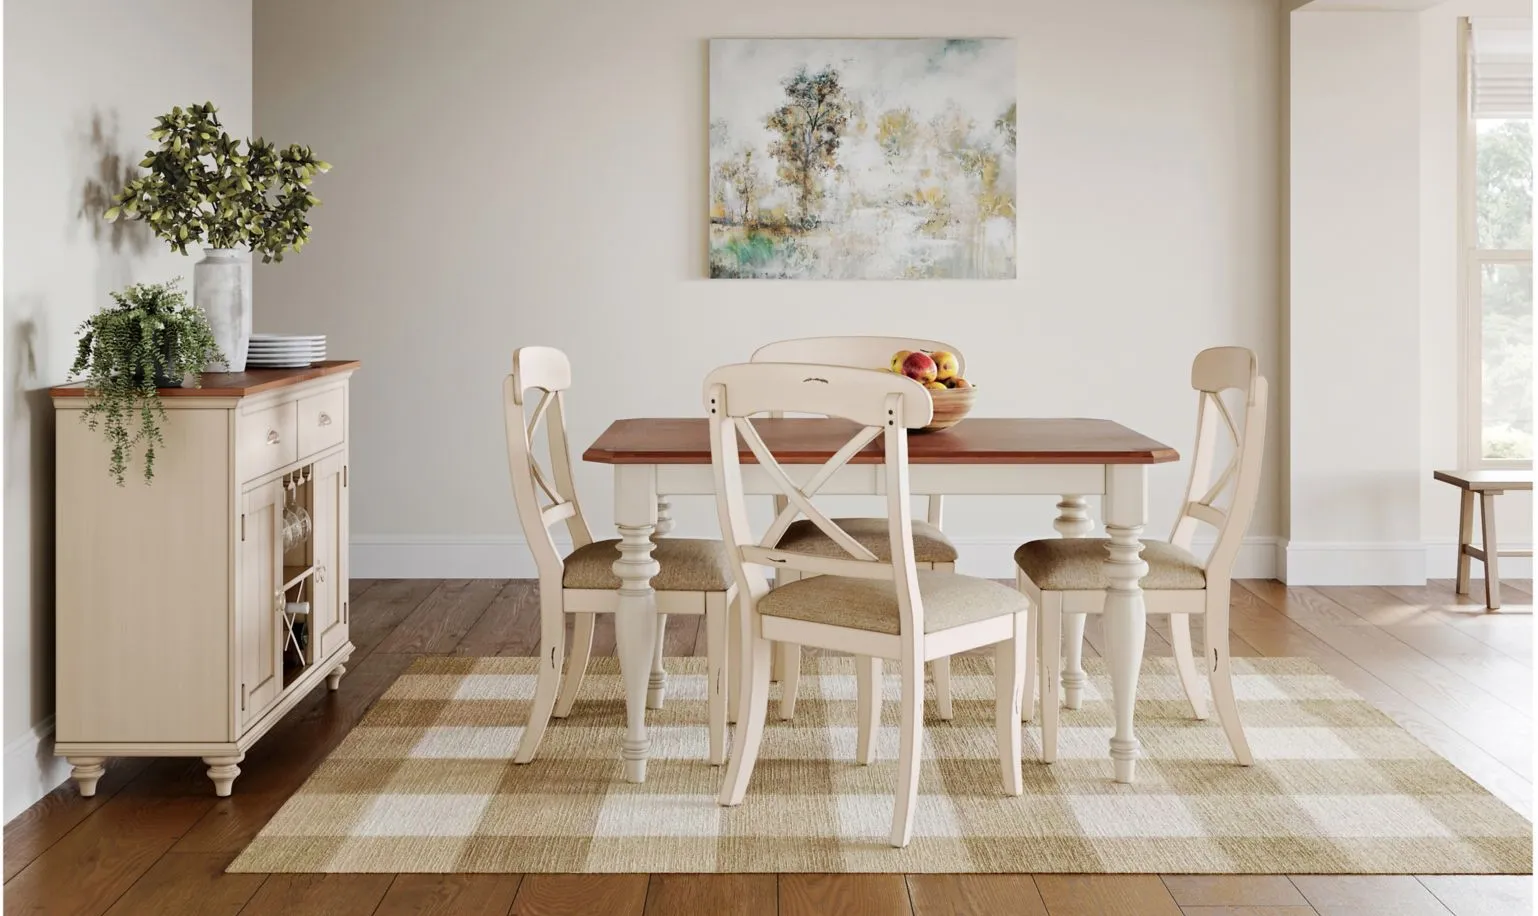 Sagamore 5-pc. Dining Set in Bisque / Natural Pine by Liberty Furniture